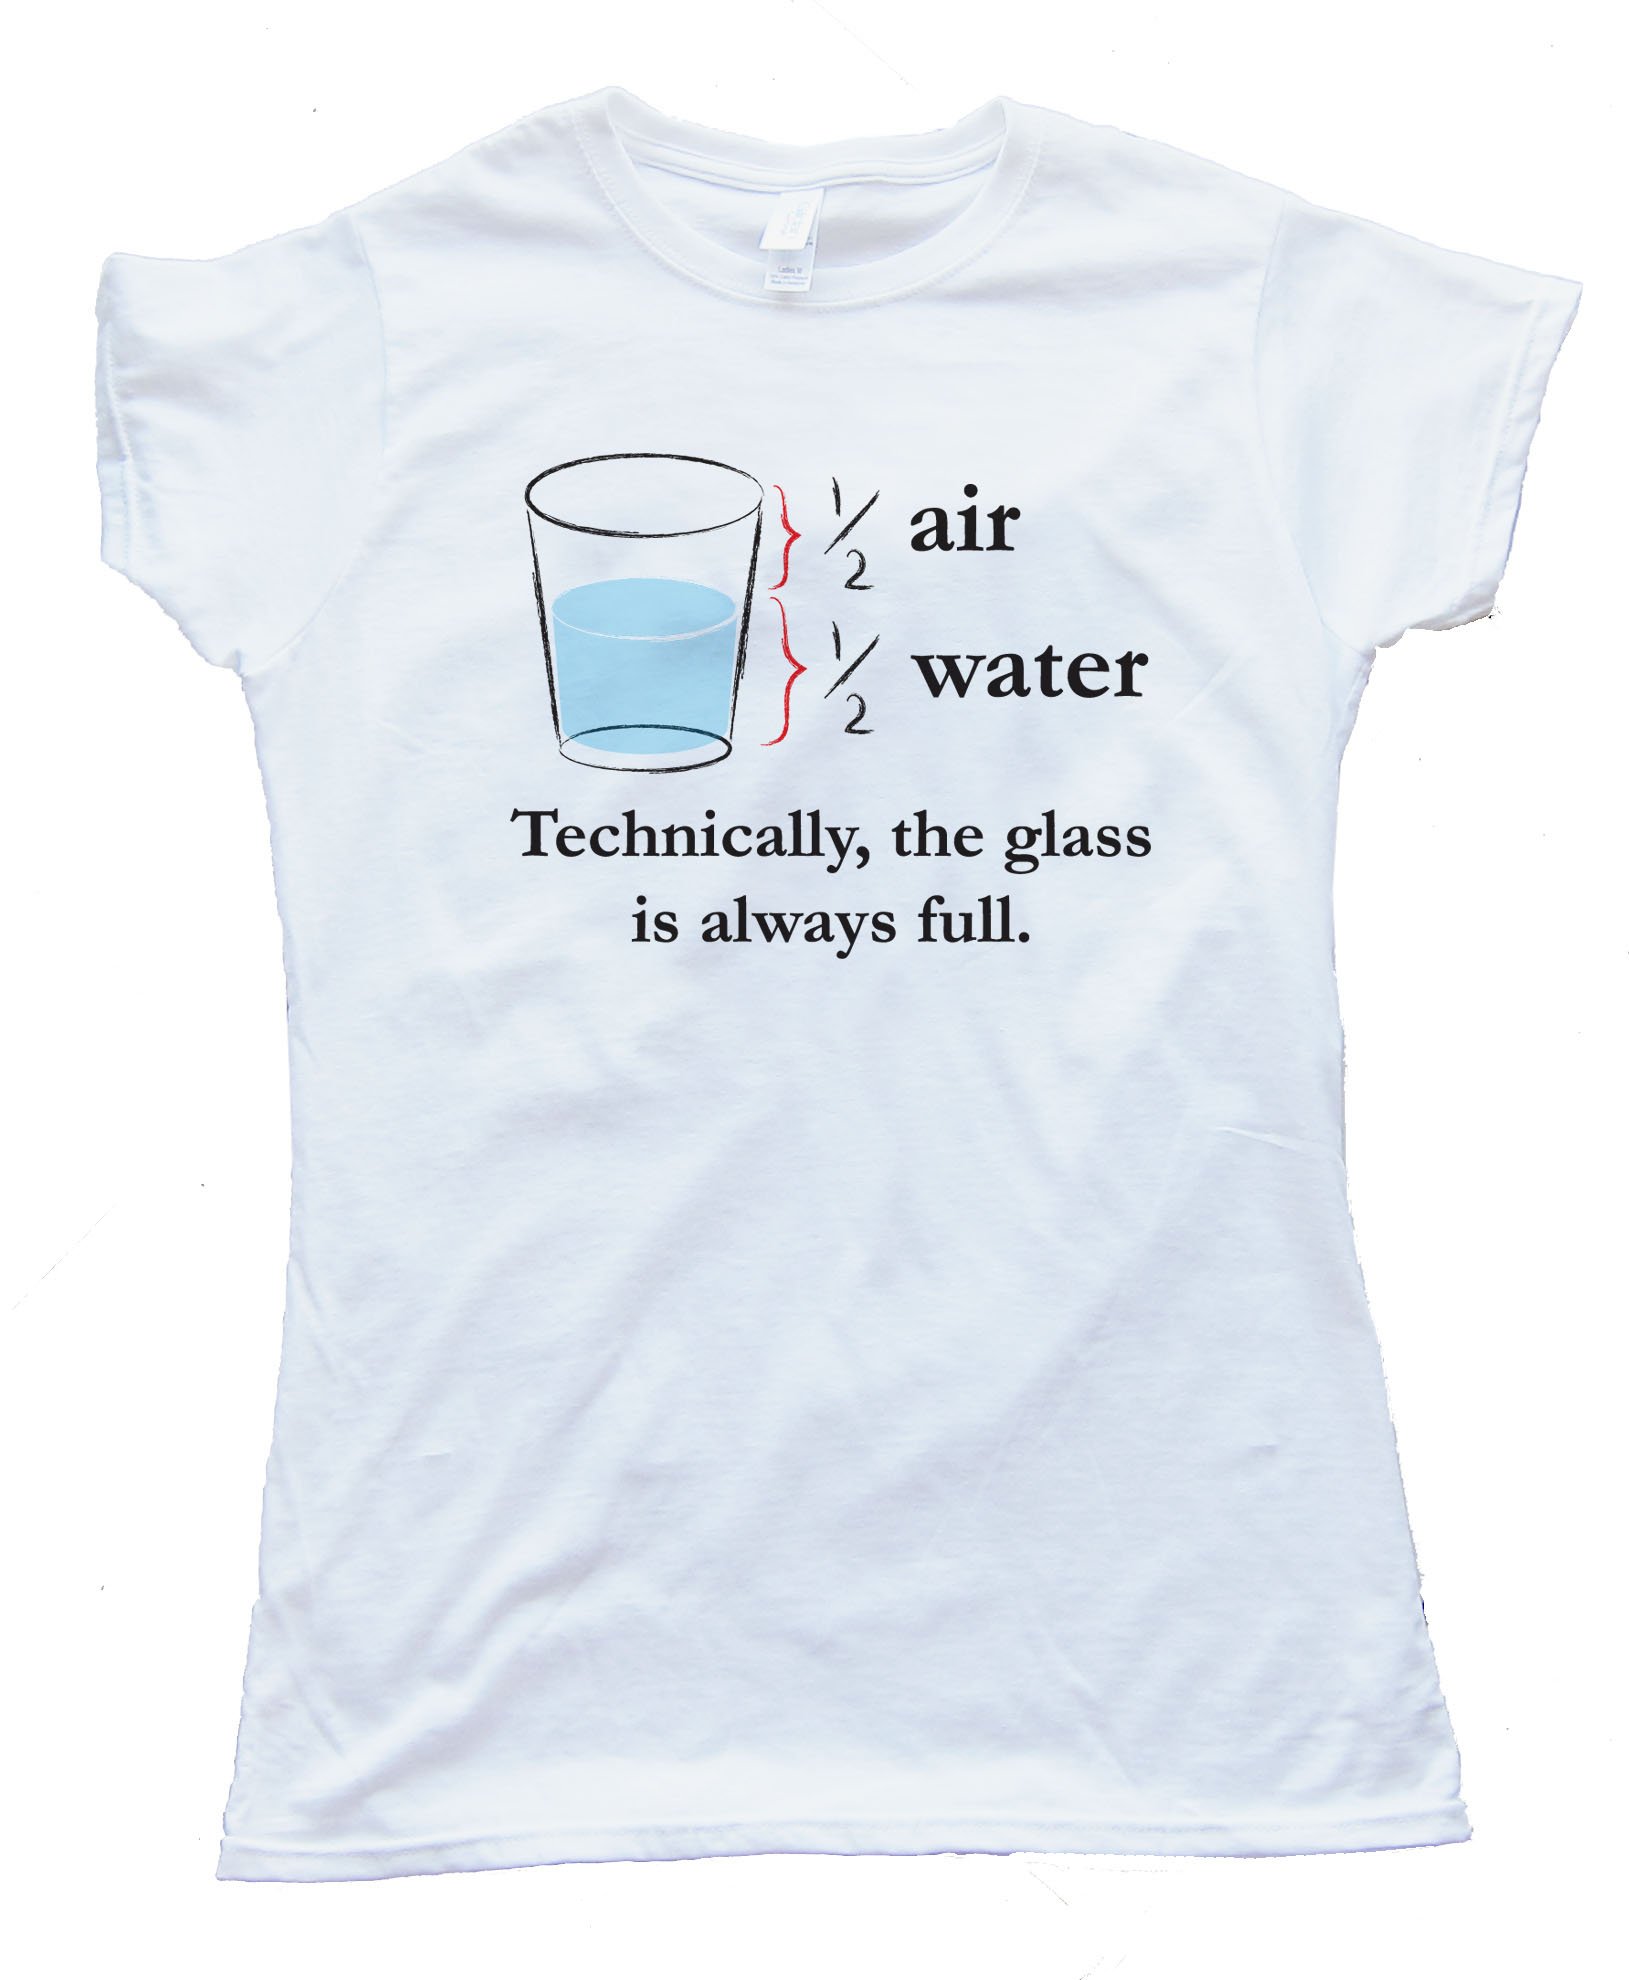 Technically The Glass Is Always Full - Tee Shirt